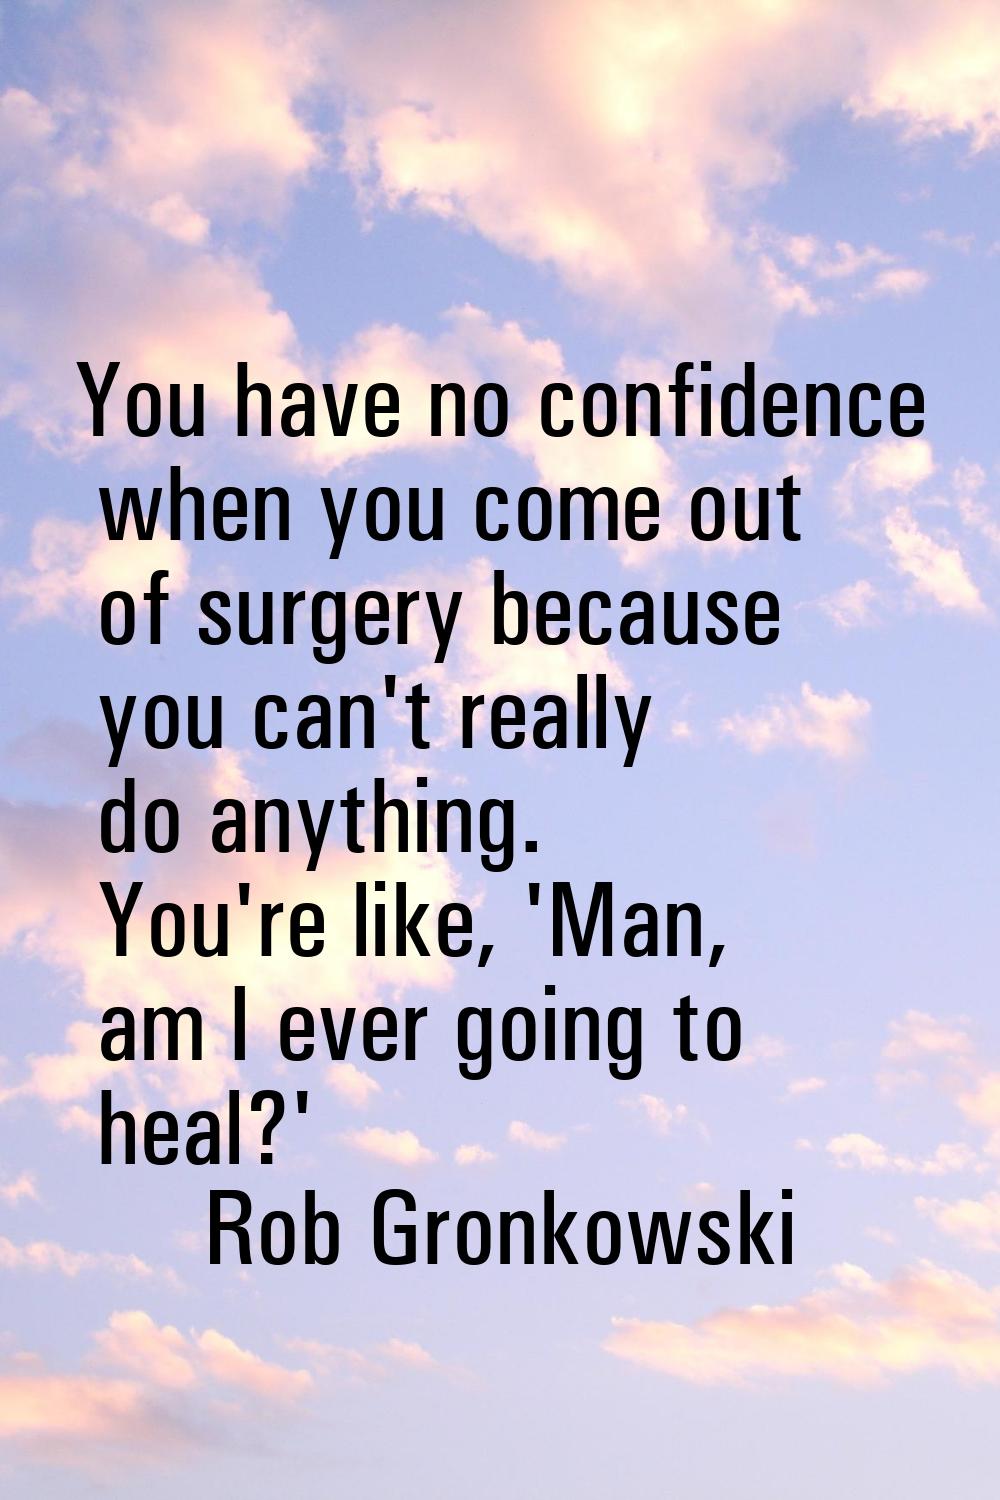 You have no confidence when you come out of surgery because you can't really do anything. You're li